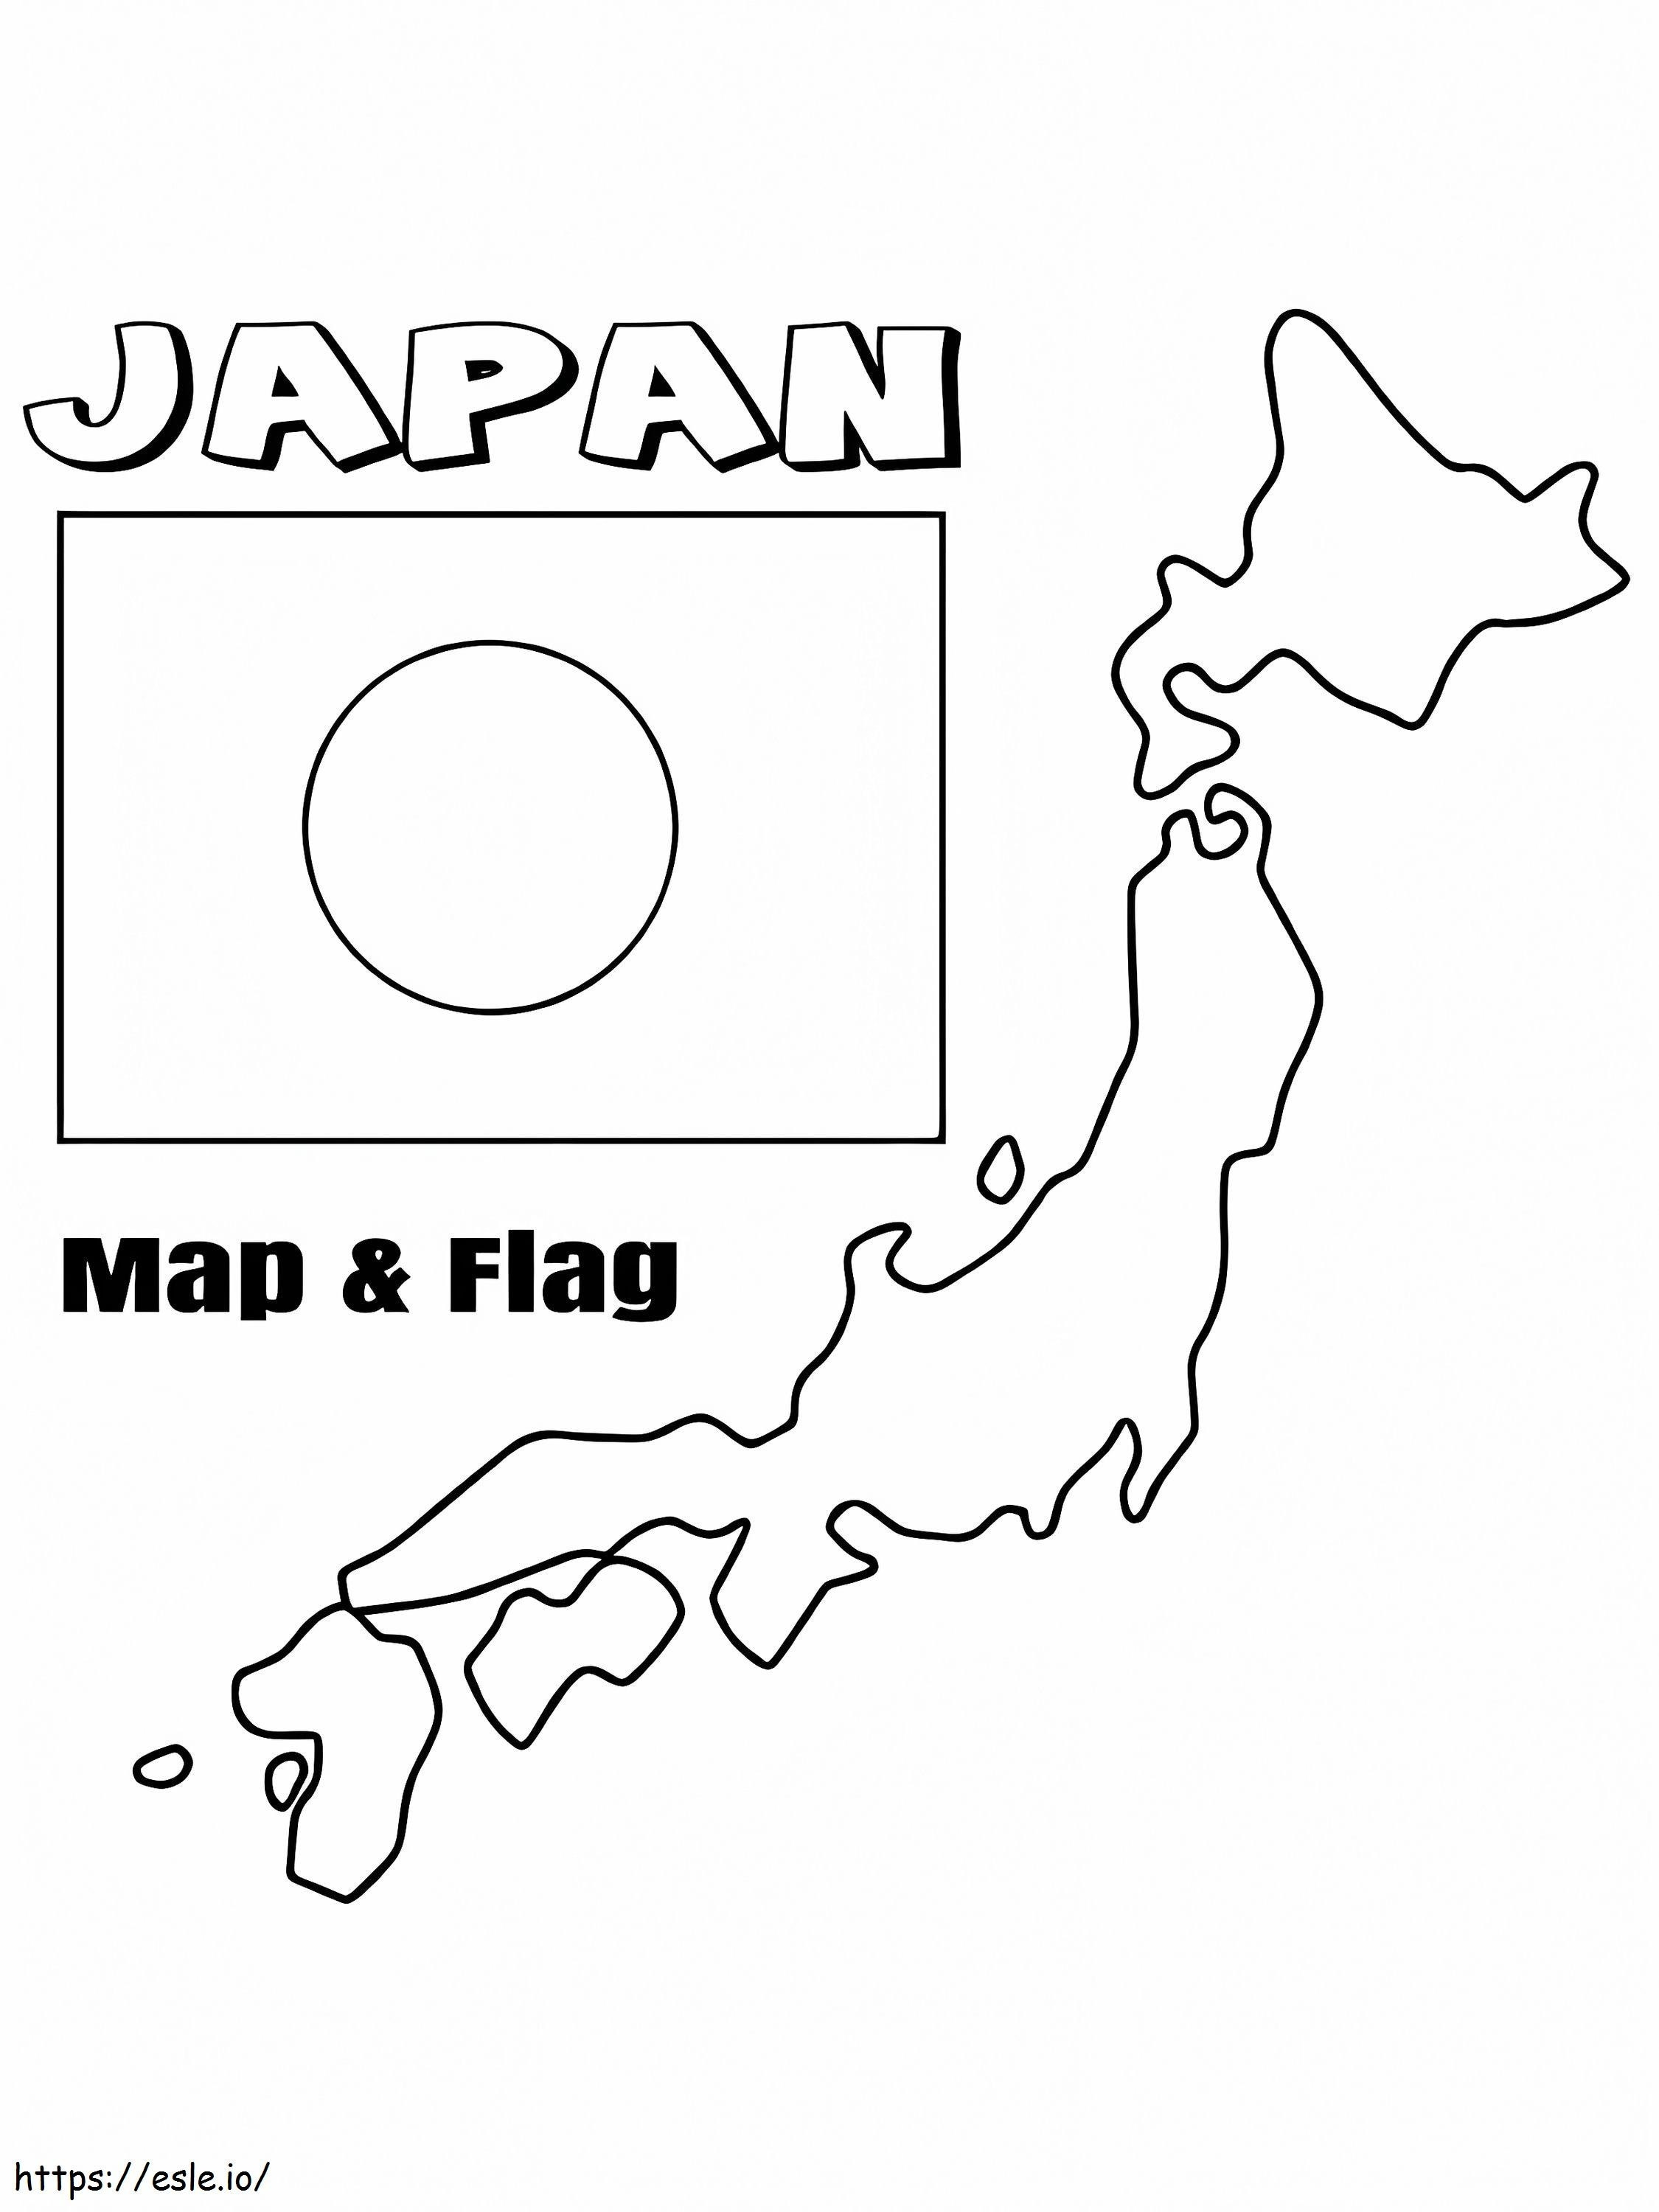 Japan Flag And Map coloring page